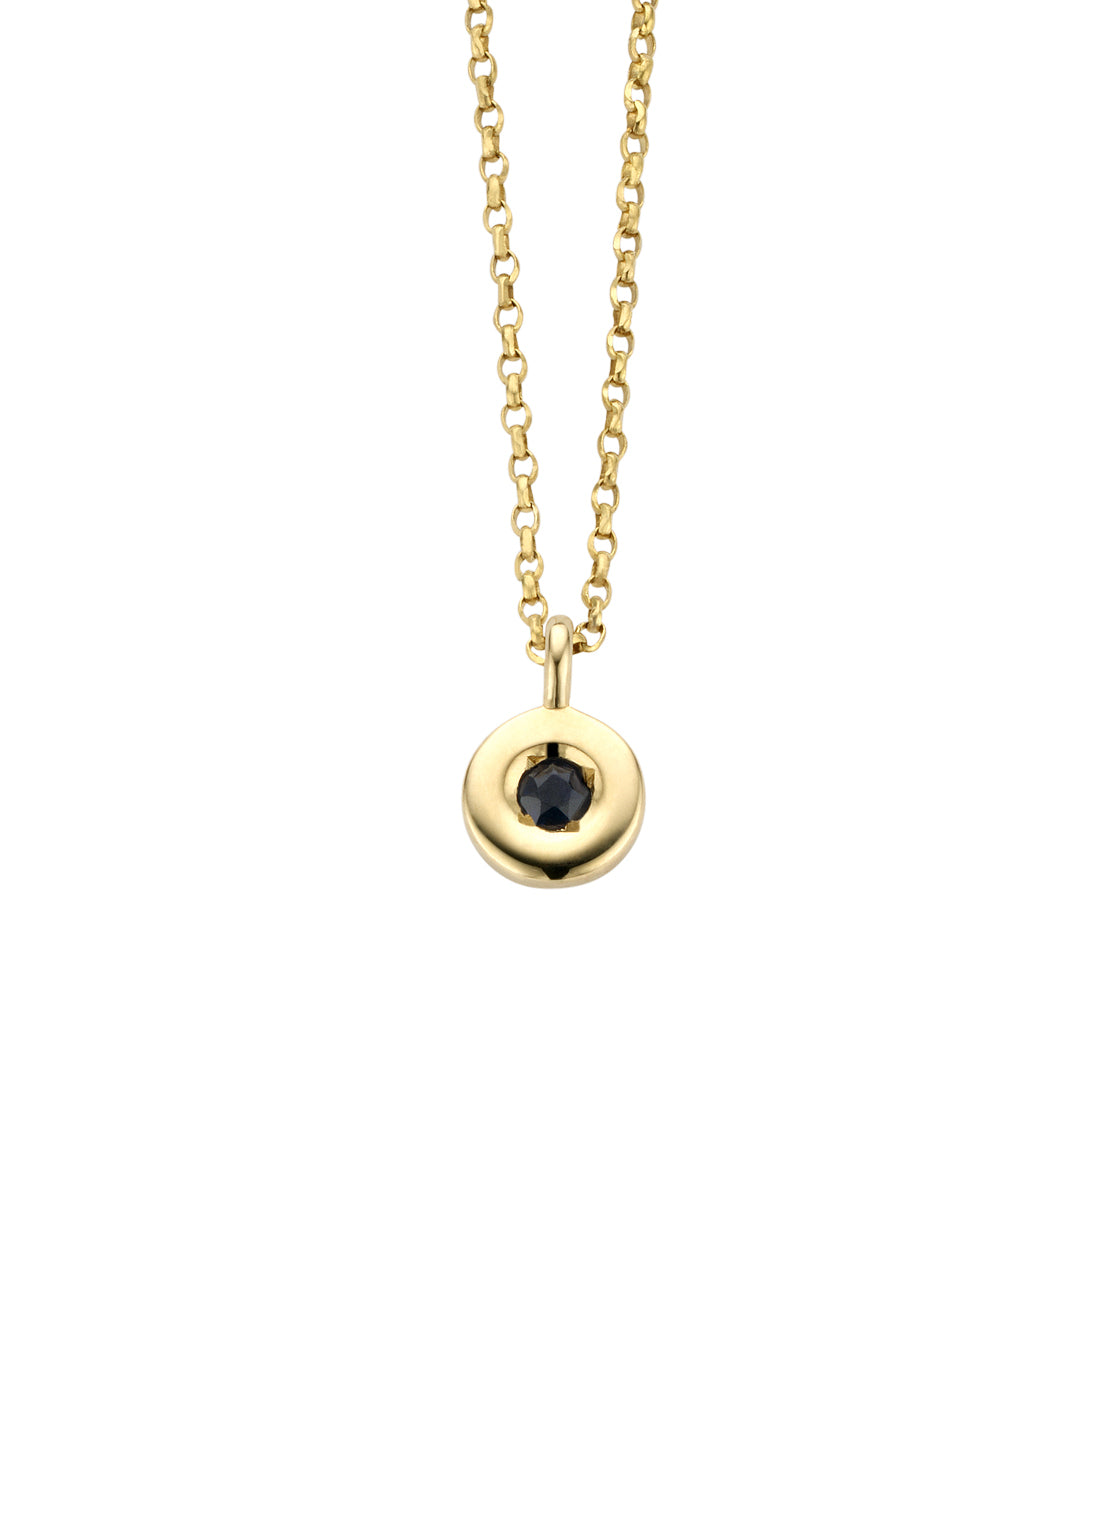 Birthstones Golden Pendant with Colorstone September